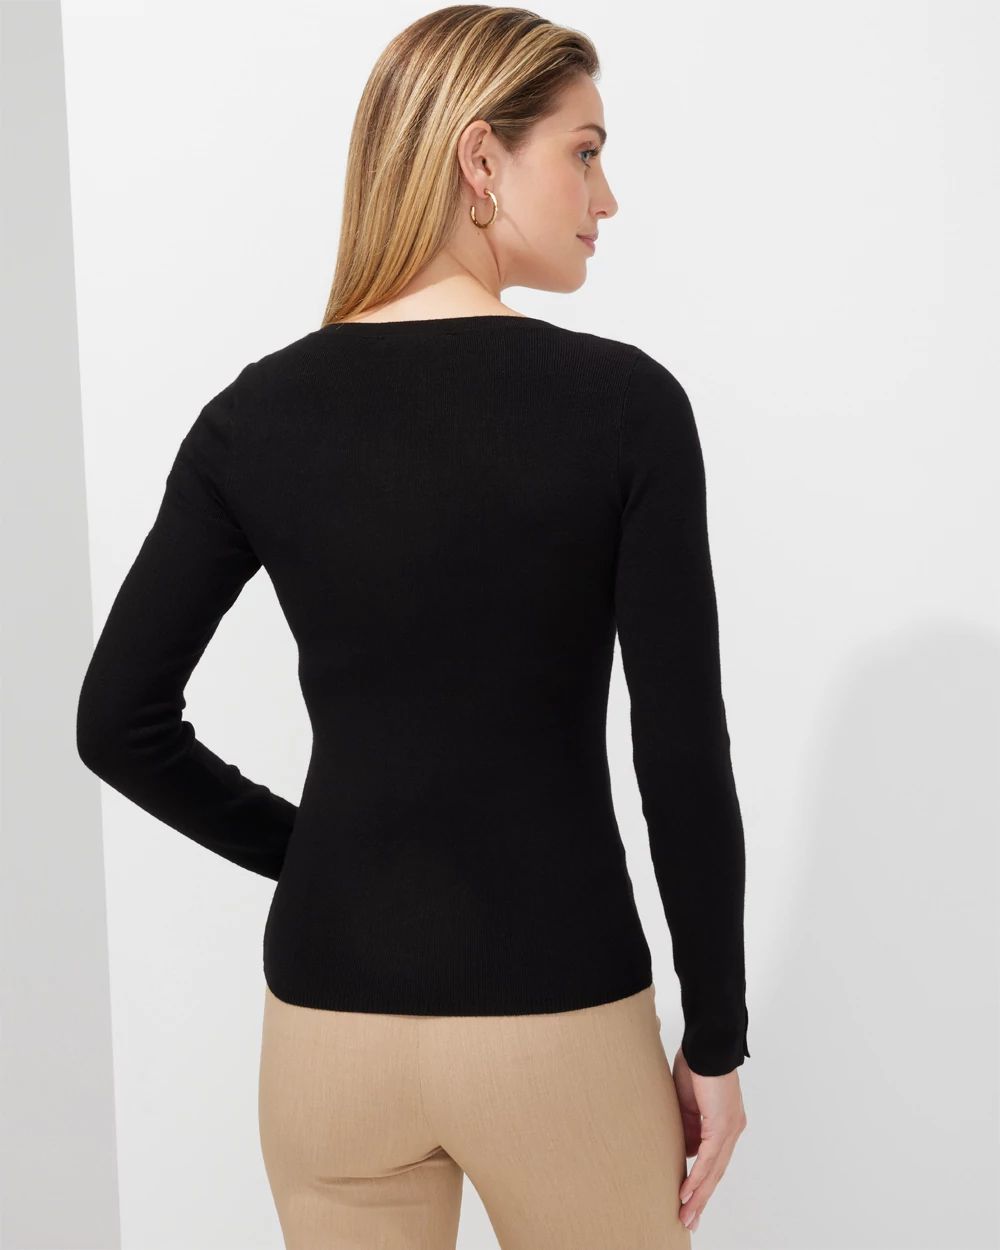 Outlet WHBM V-Neck Pullover Sweater click to view larger image.